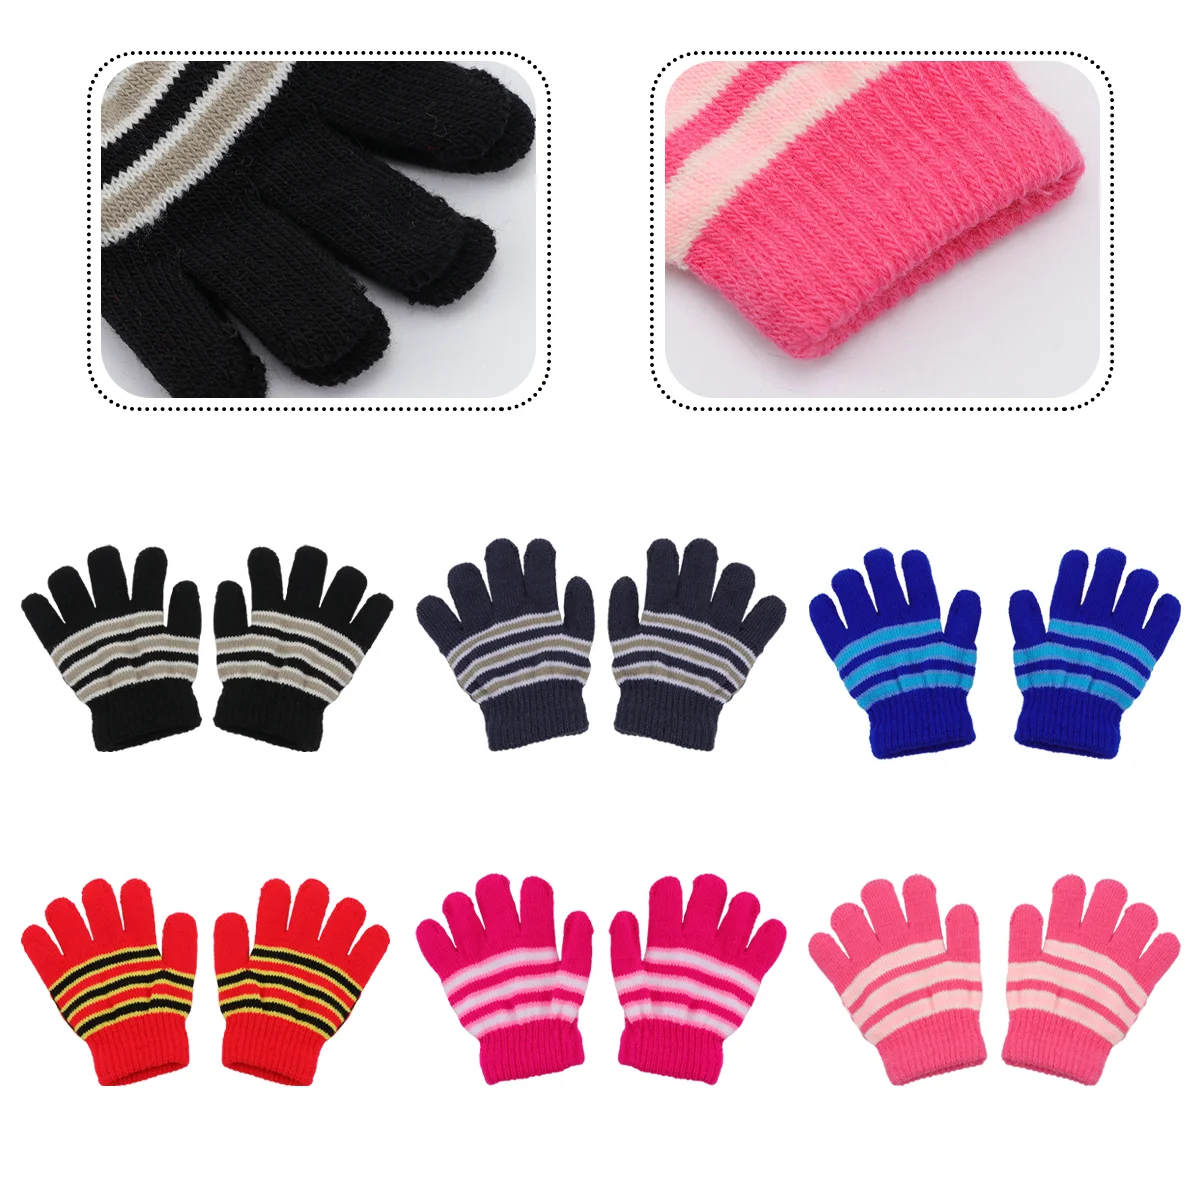 

Gloves Kids Winter Mittens Toddler Ages Mitten Warm Full 56 2 Knitted 4 10 Year Old Boys Stretchy Fingers Striped Girls